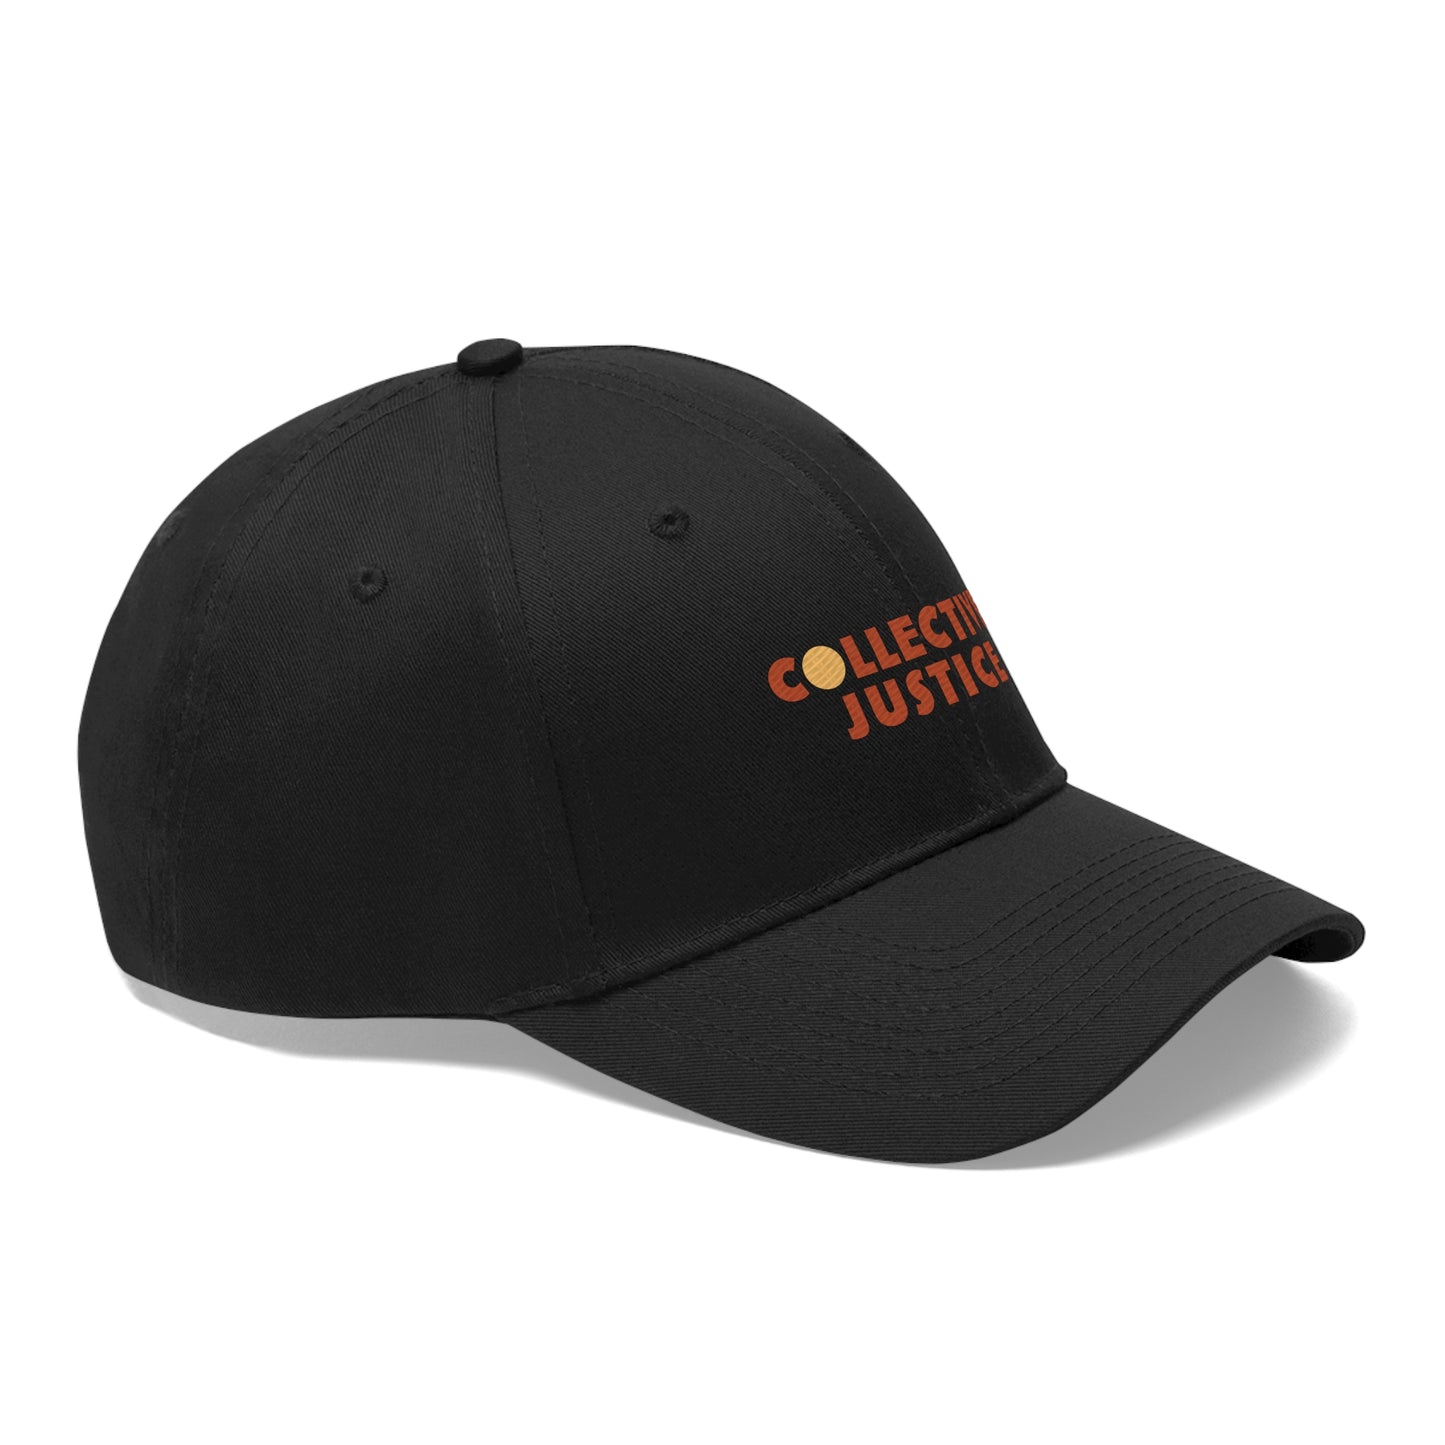 Collective Justice Hat